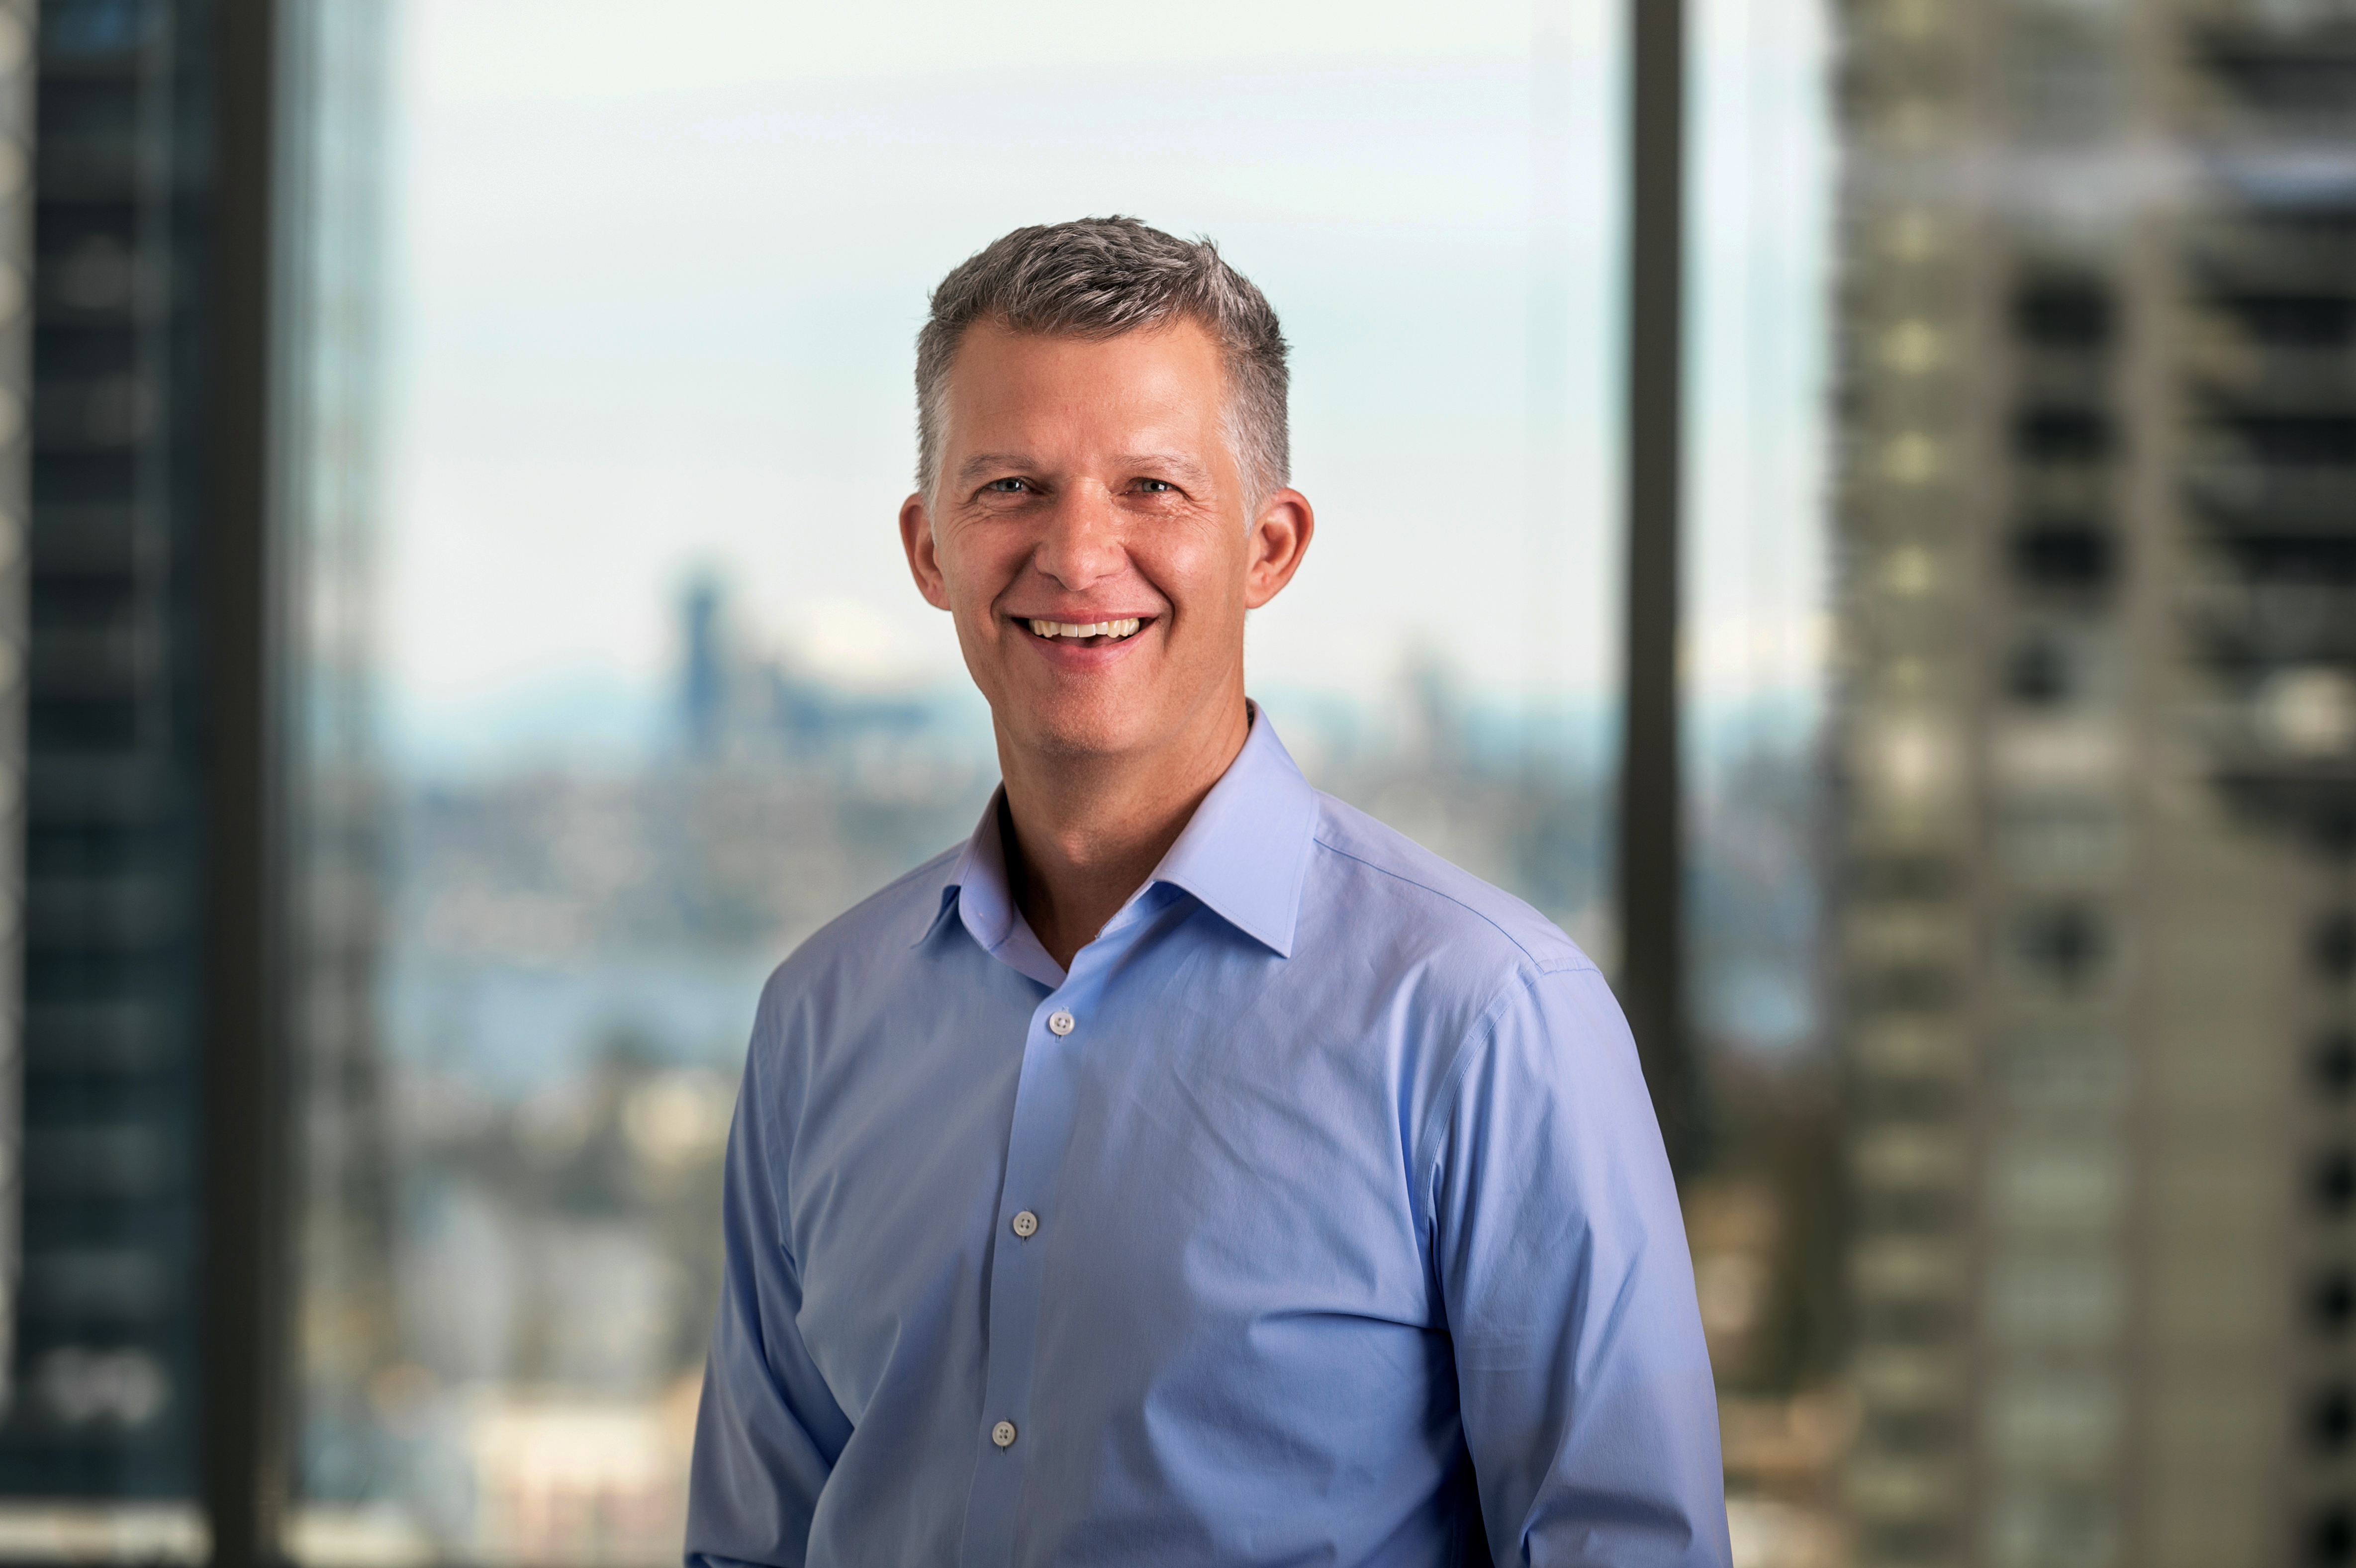 Brian Kelly joins global commercial real estate advisory services firm Savills as executive managing director and co-market leader in the Seattle office.